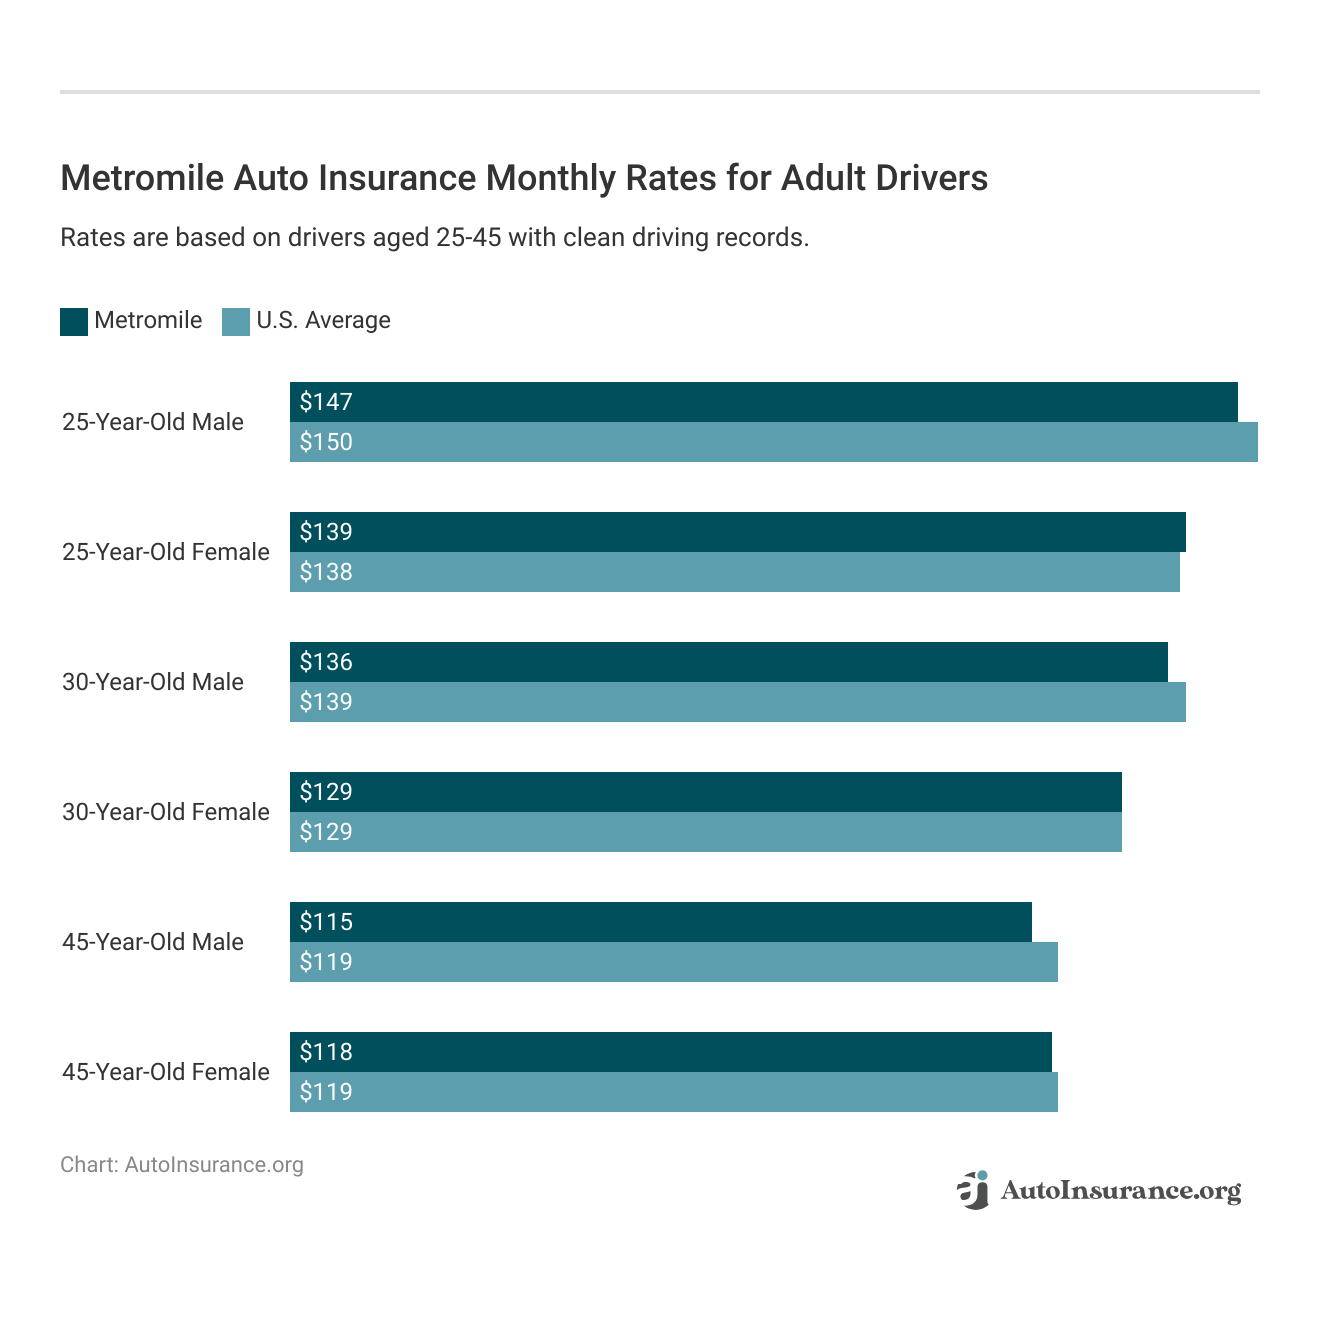 <h3>Metromile Auto Insurance Monthly Rates for Adult Drivers</h3>